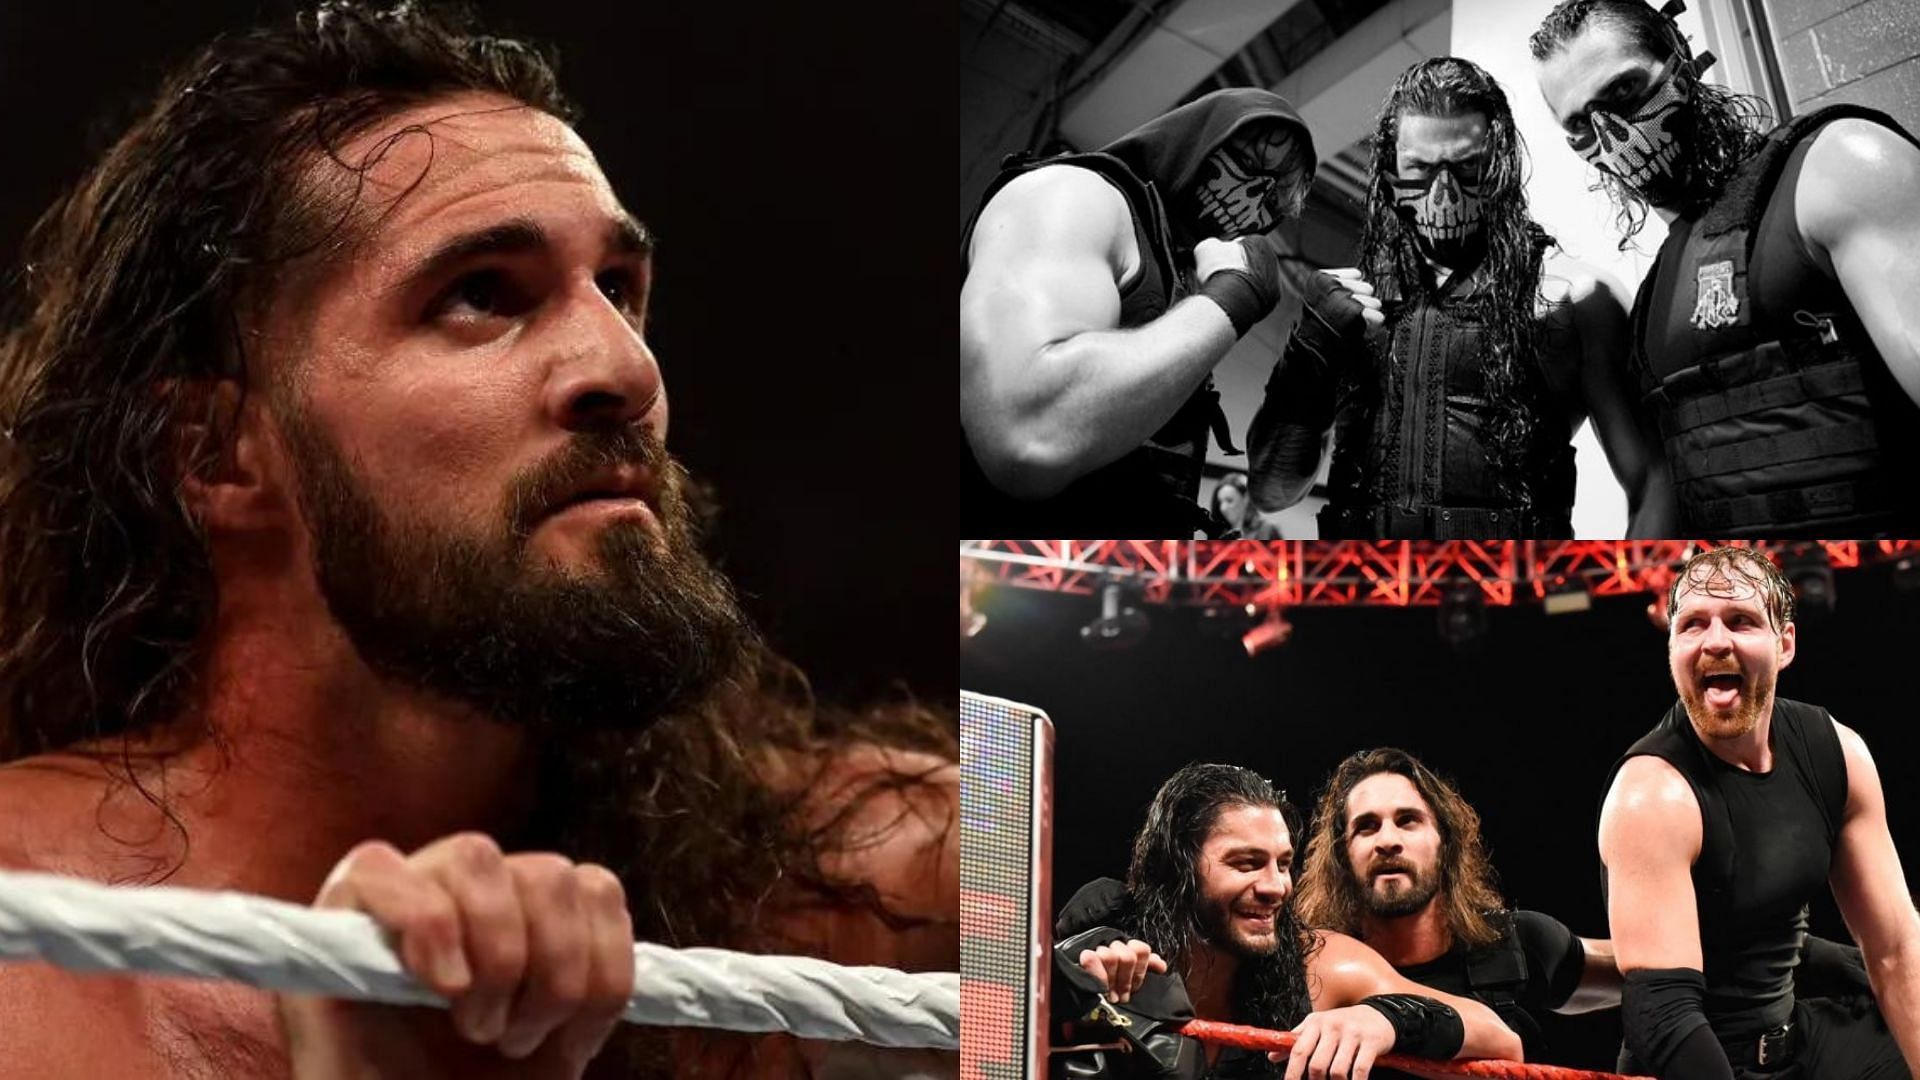 Seth Rollins, Roman Reigns, and Jon Moxley (Dean Ambrose) are former Shield members